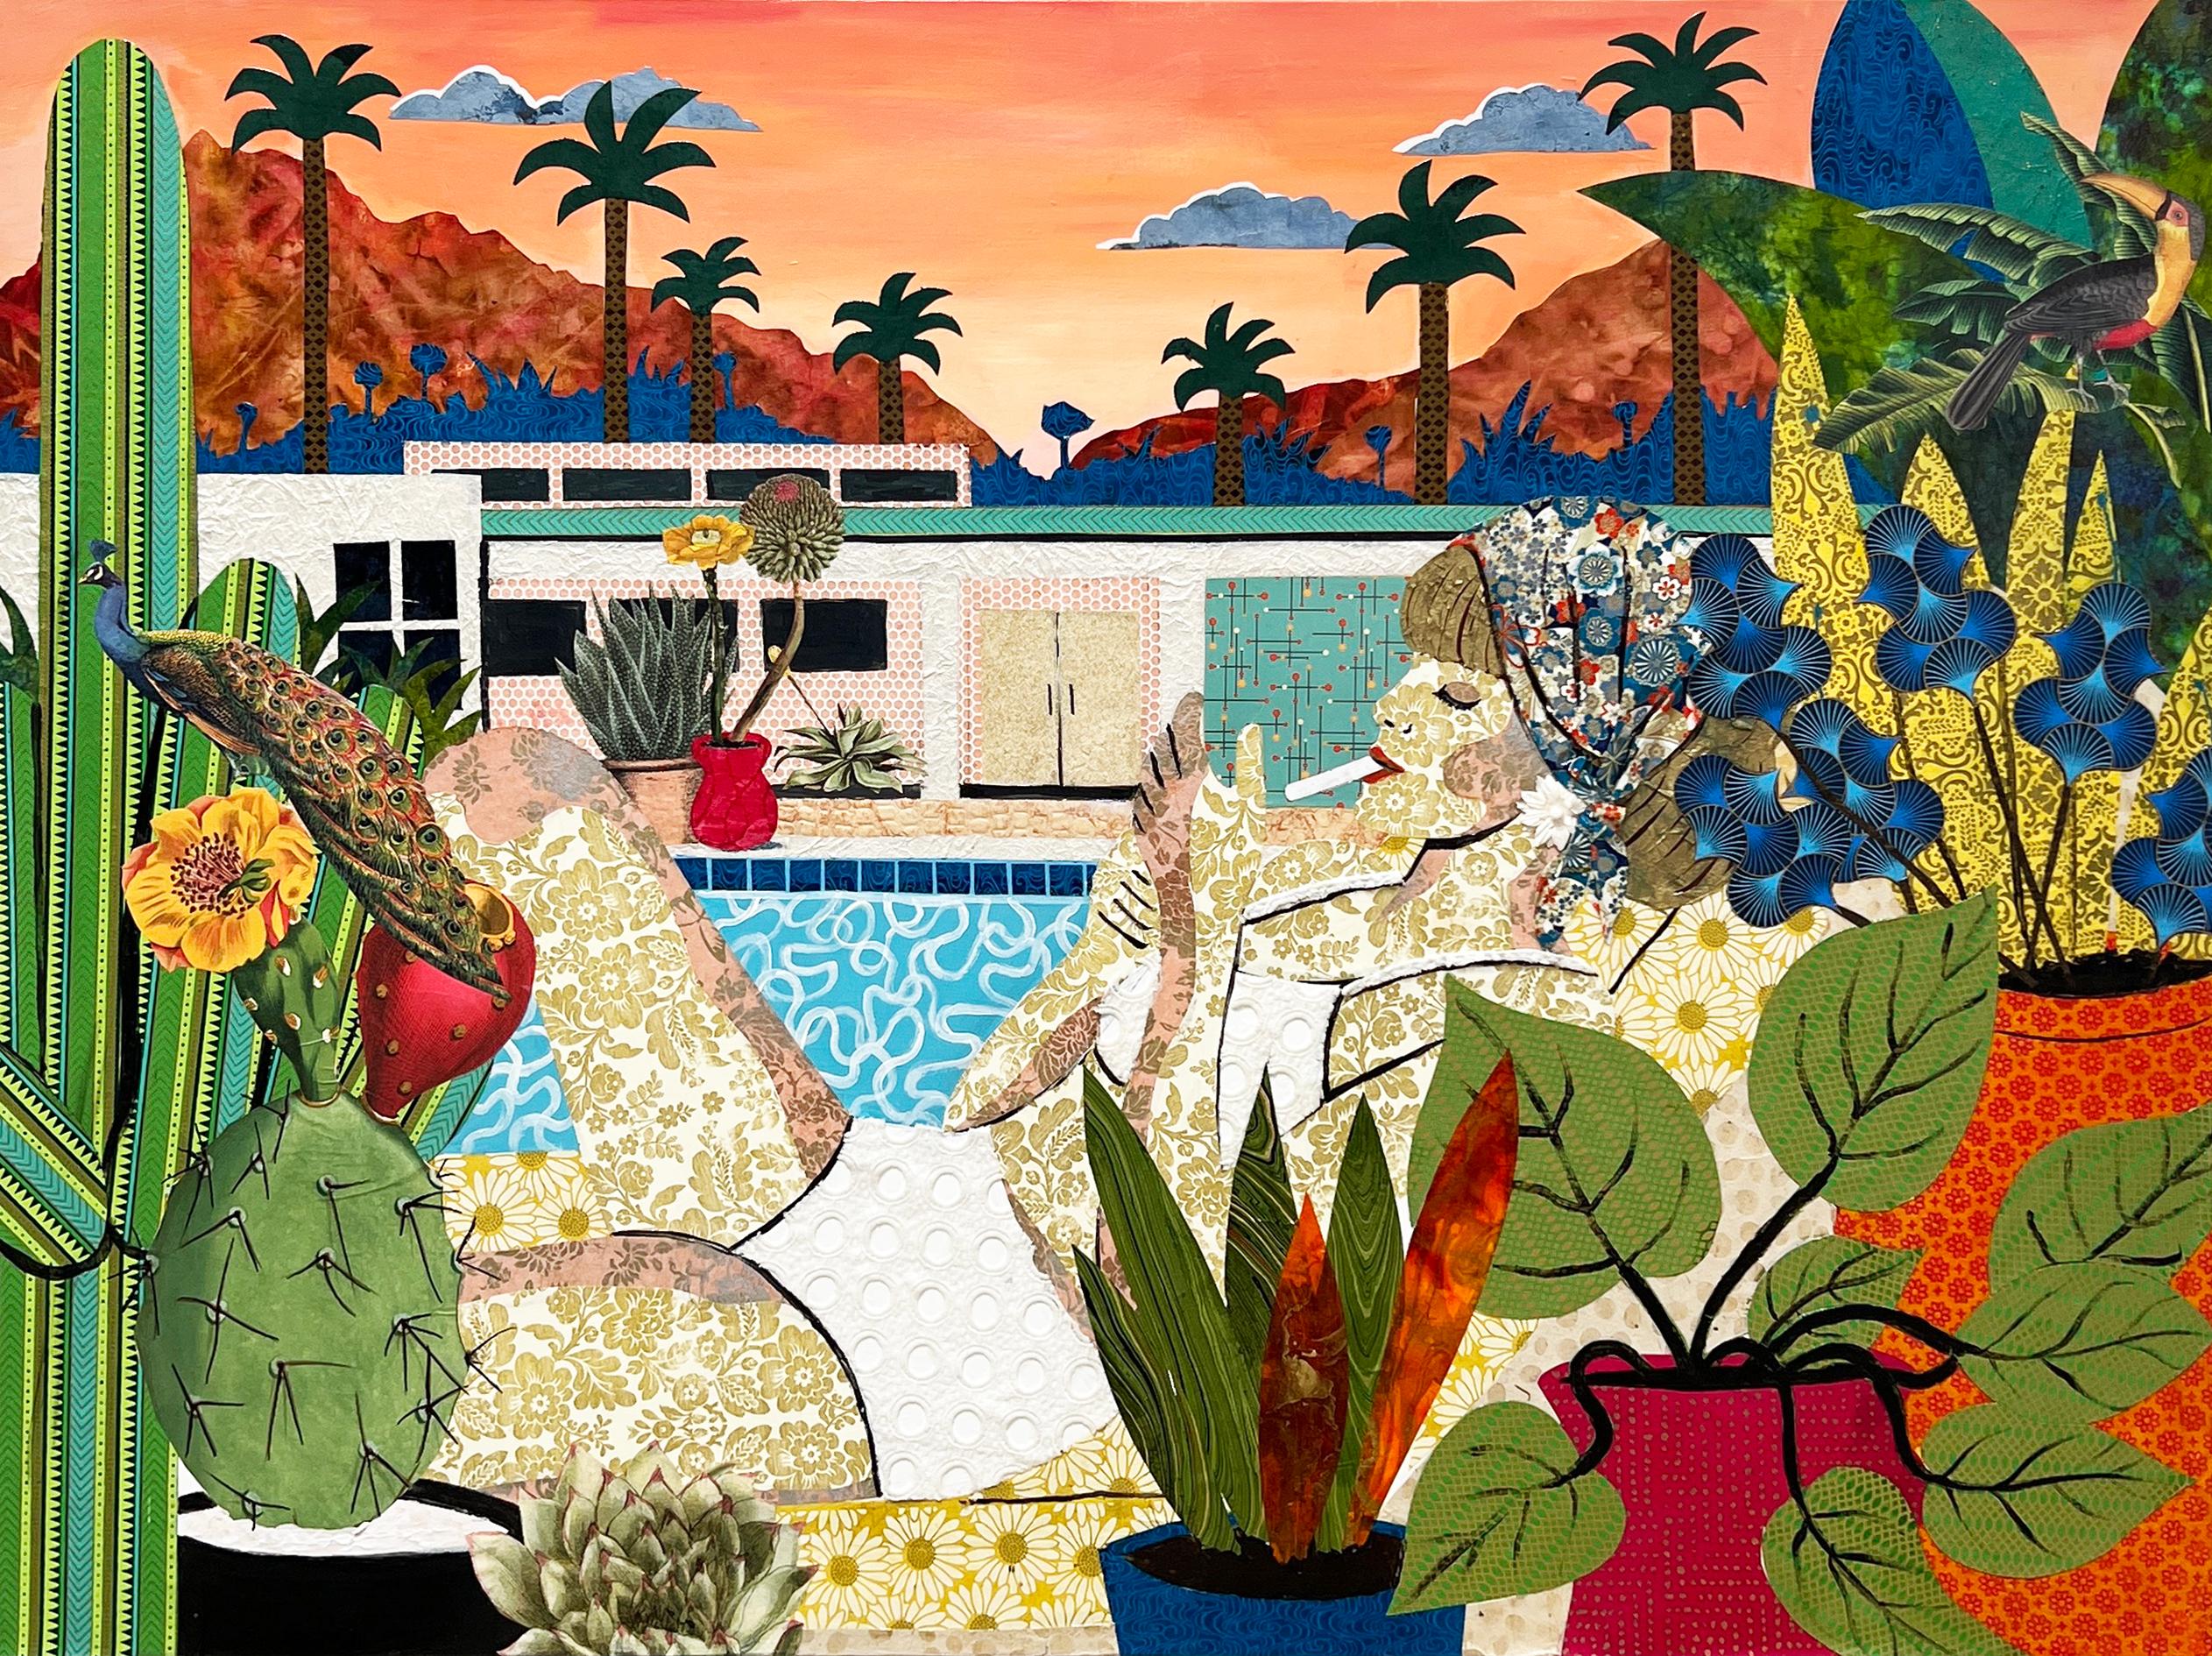 "Palm Springs Is Always A Good Idea" - Mixed Media Textured Collage Painting - Mixed Media Art by Cabell Molina